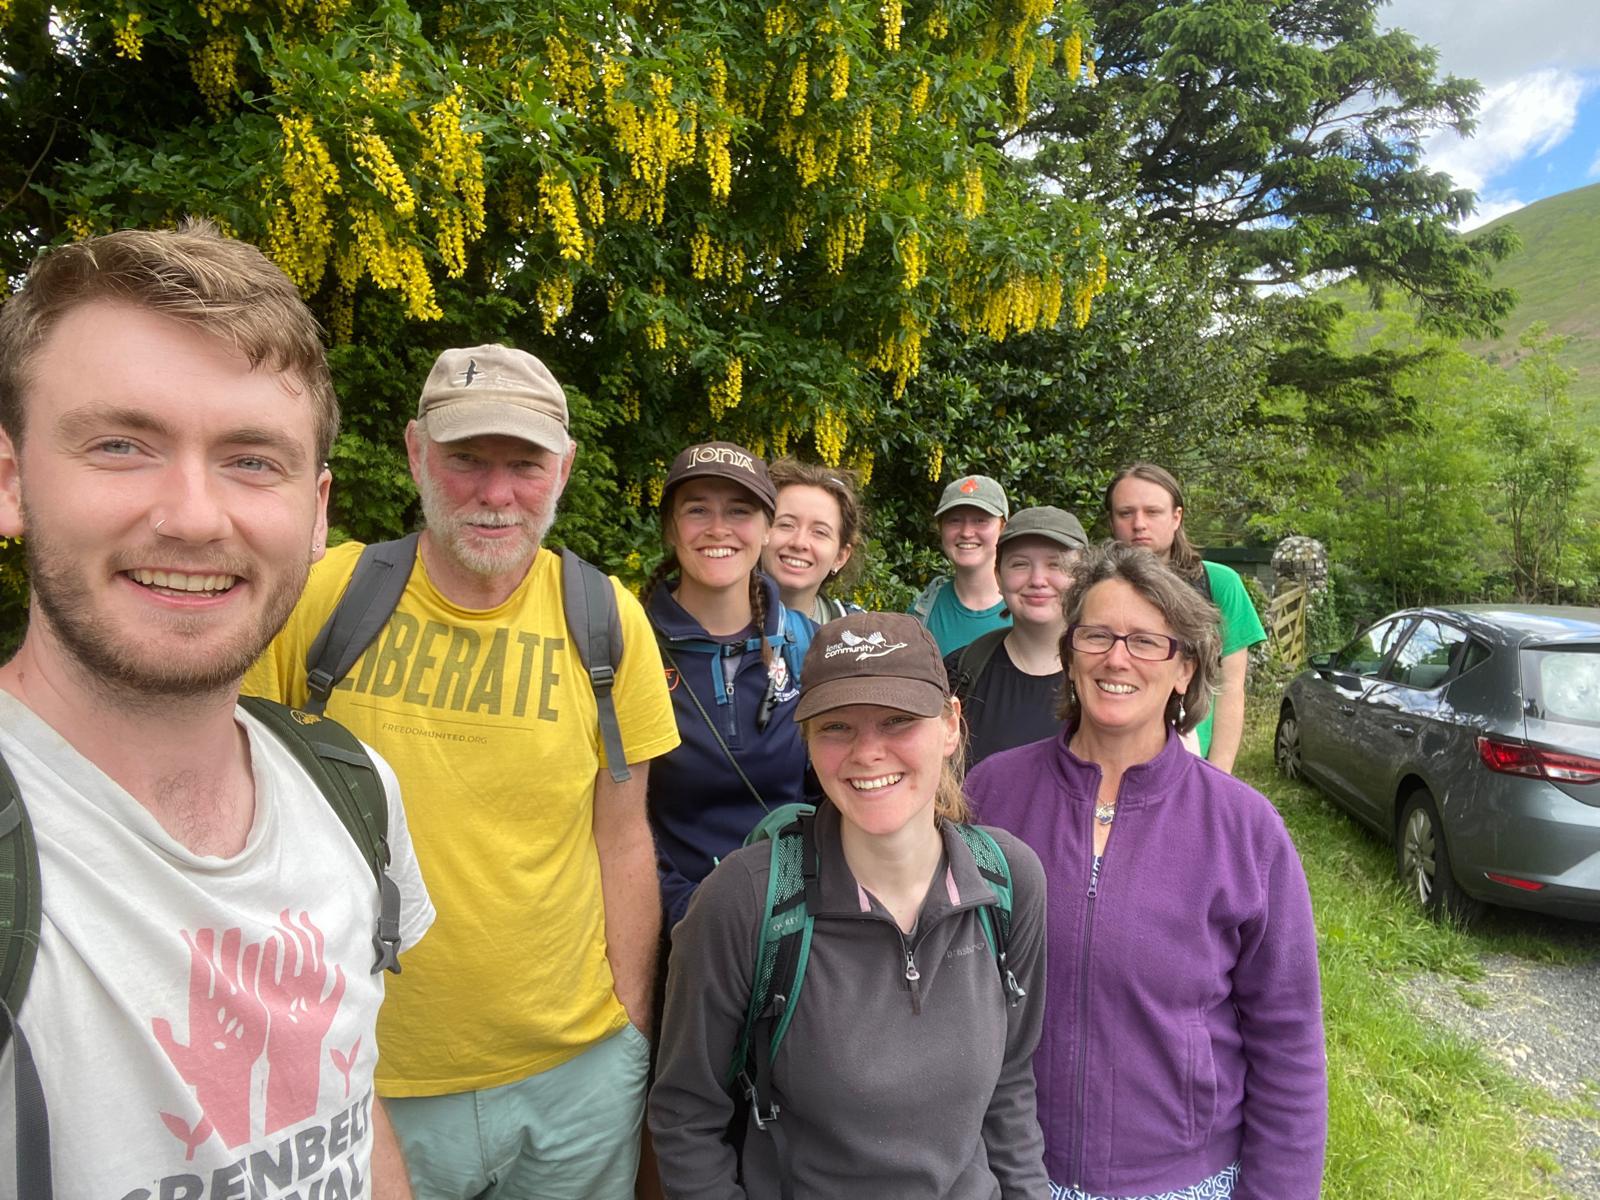 With so much busy-ness and stretch in our Community life at this time of year it felt like a struggle to take the time to pause. But what a delight to join the Young Adults Group (YAG) on pilgrimage.